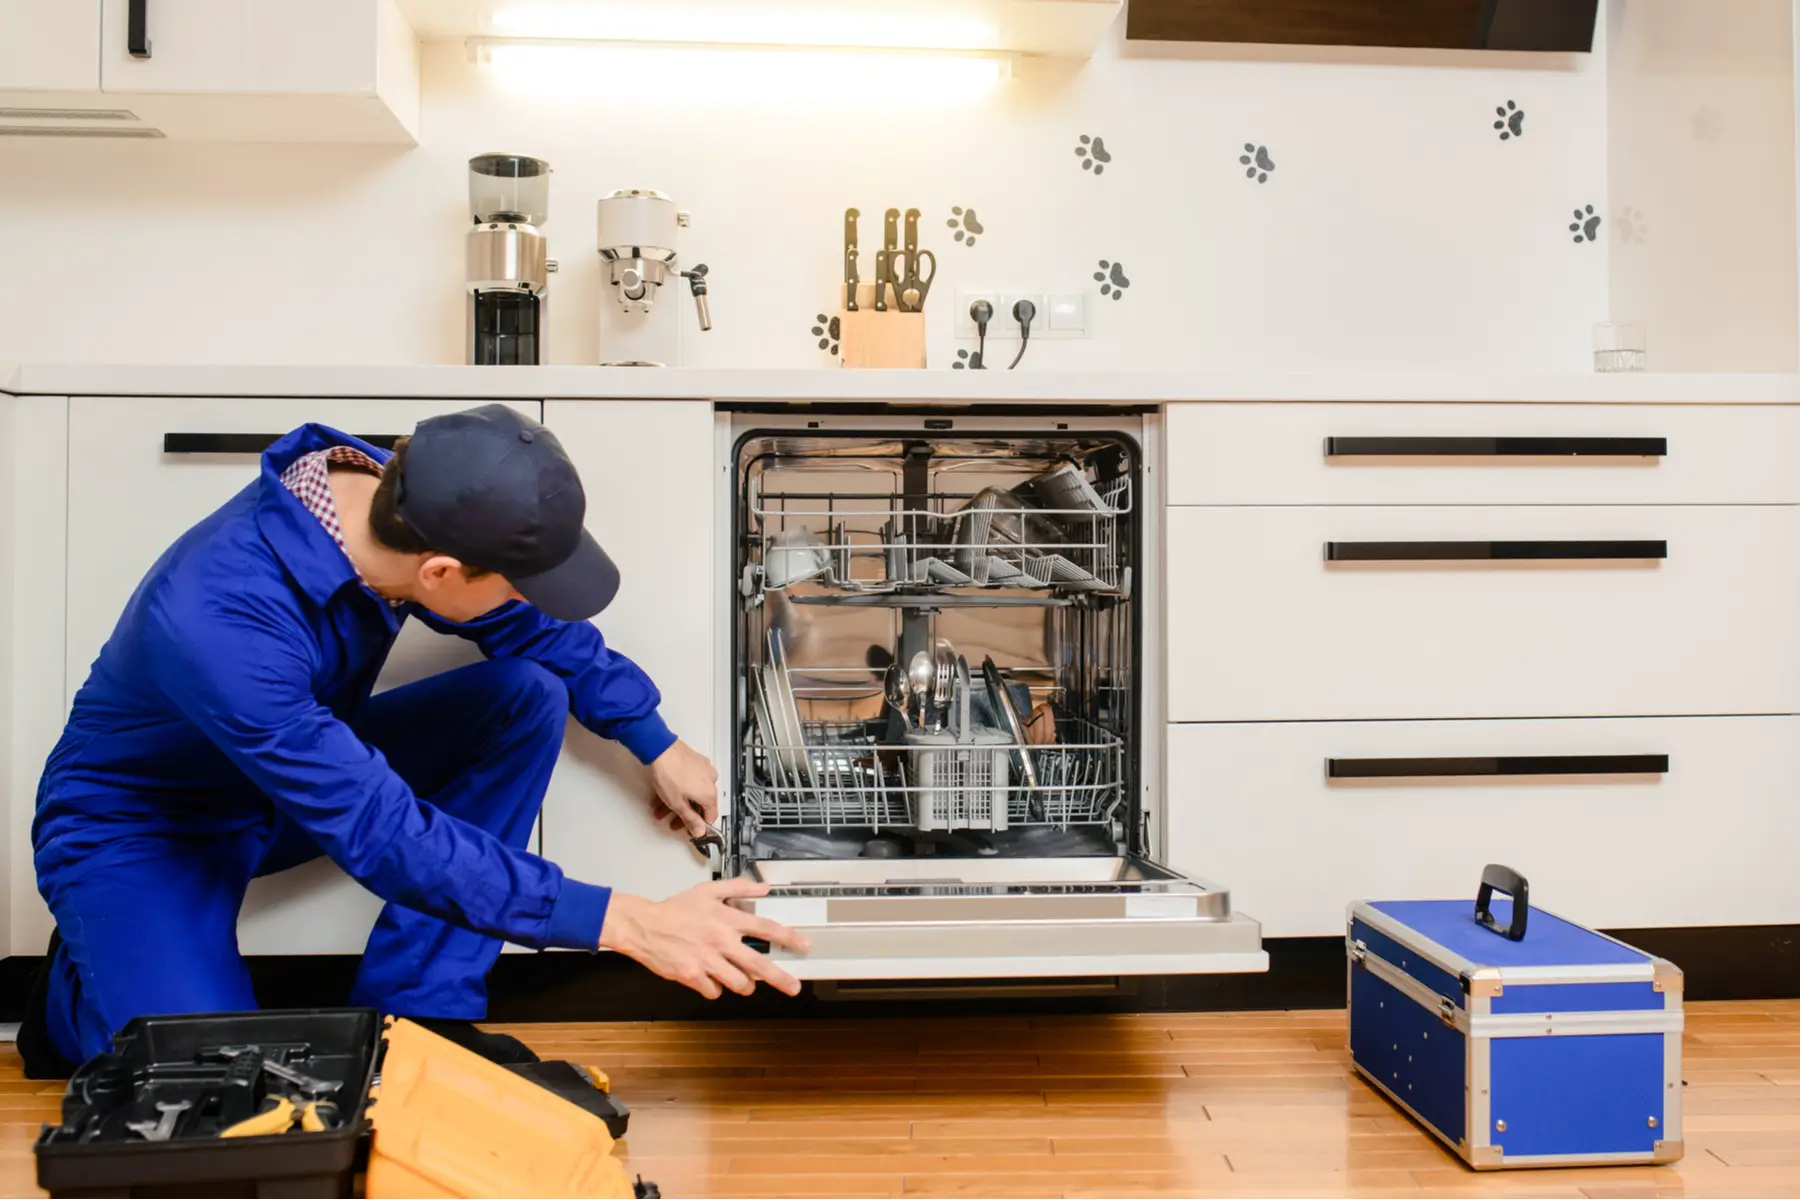 Electrician fixing dishwasher in home